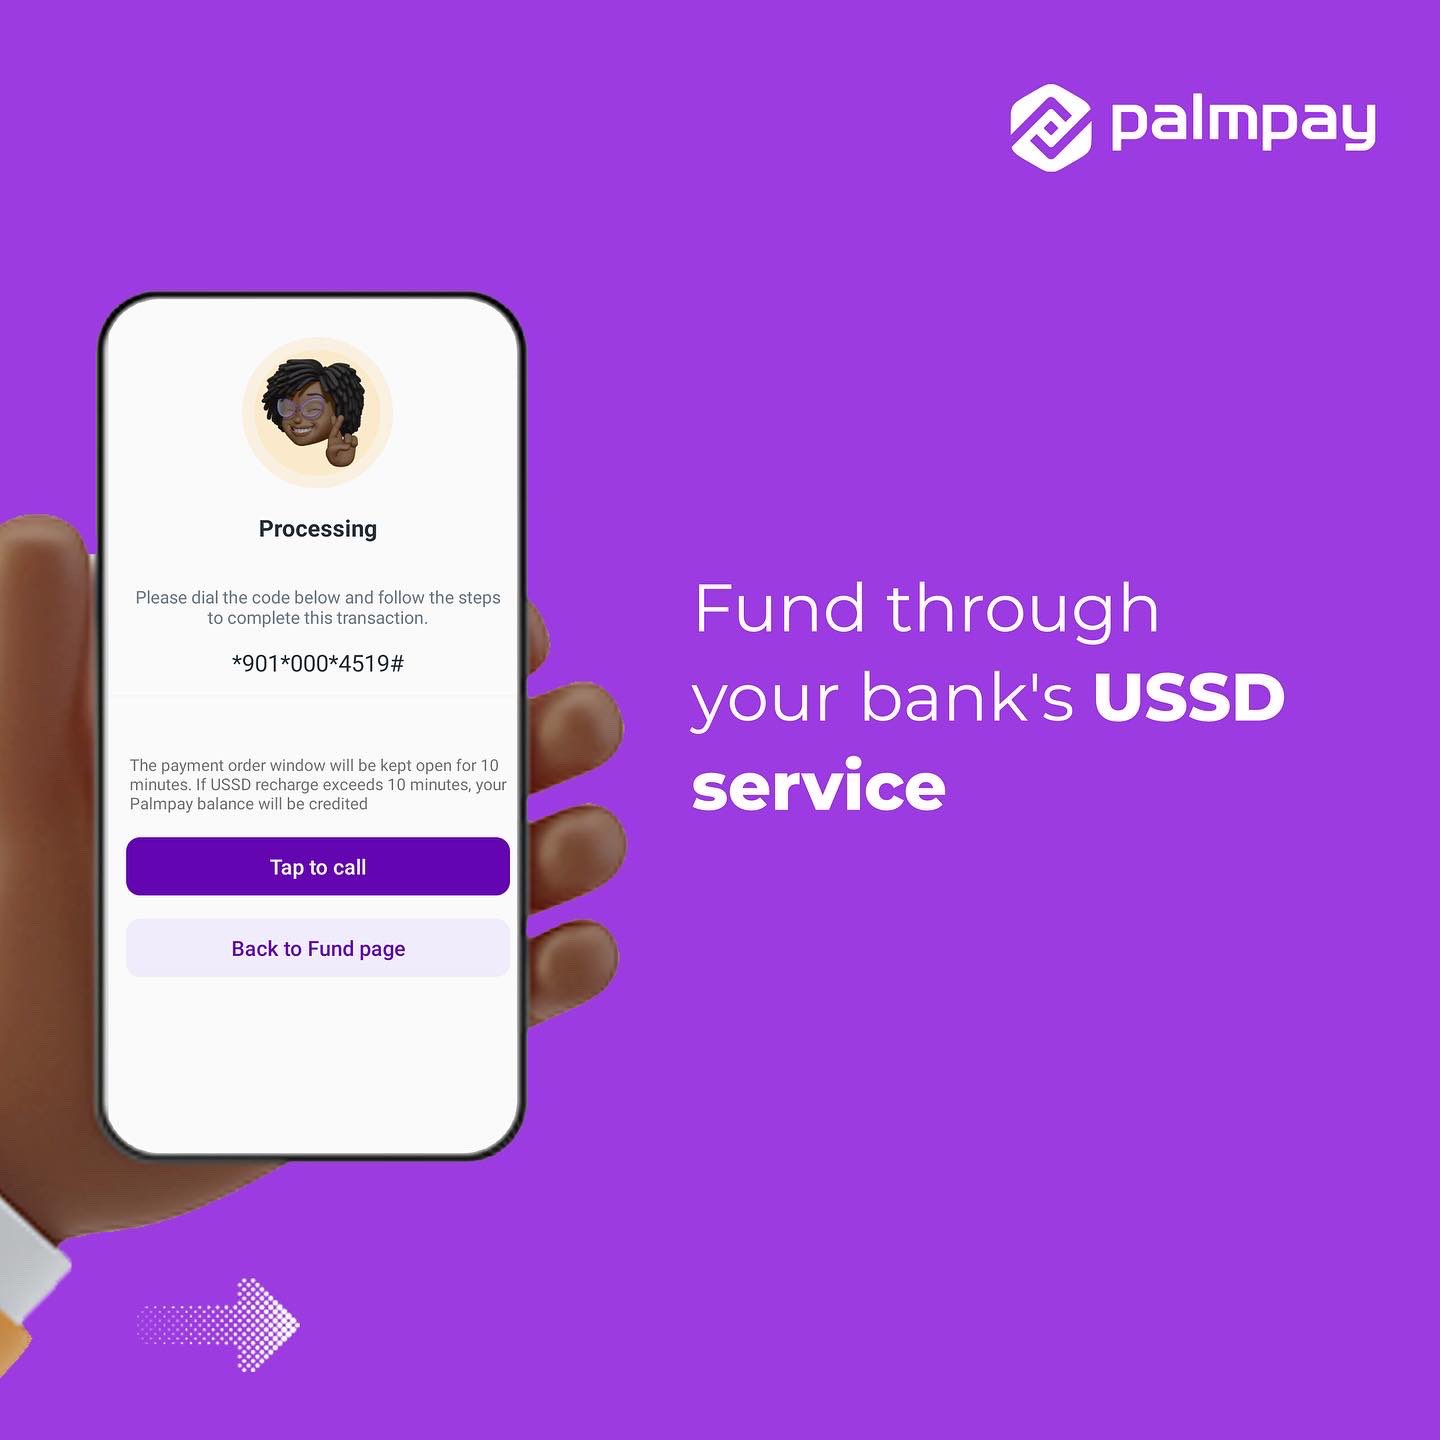 Palmpay Ussd Code to Transfer, Check Balance & for Airtime Purchase